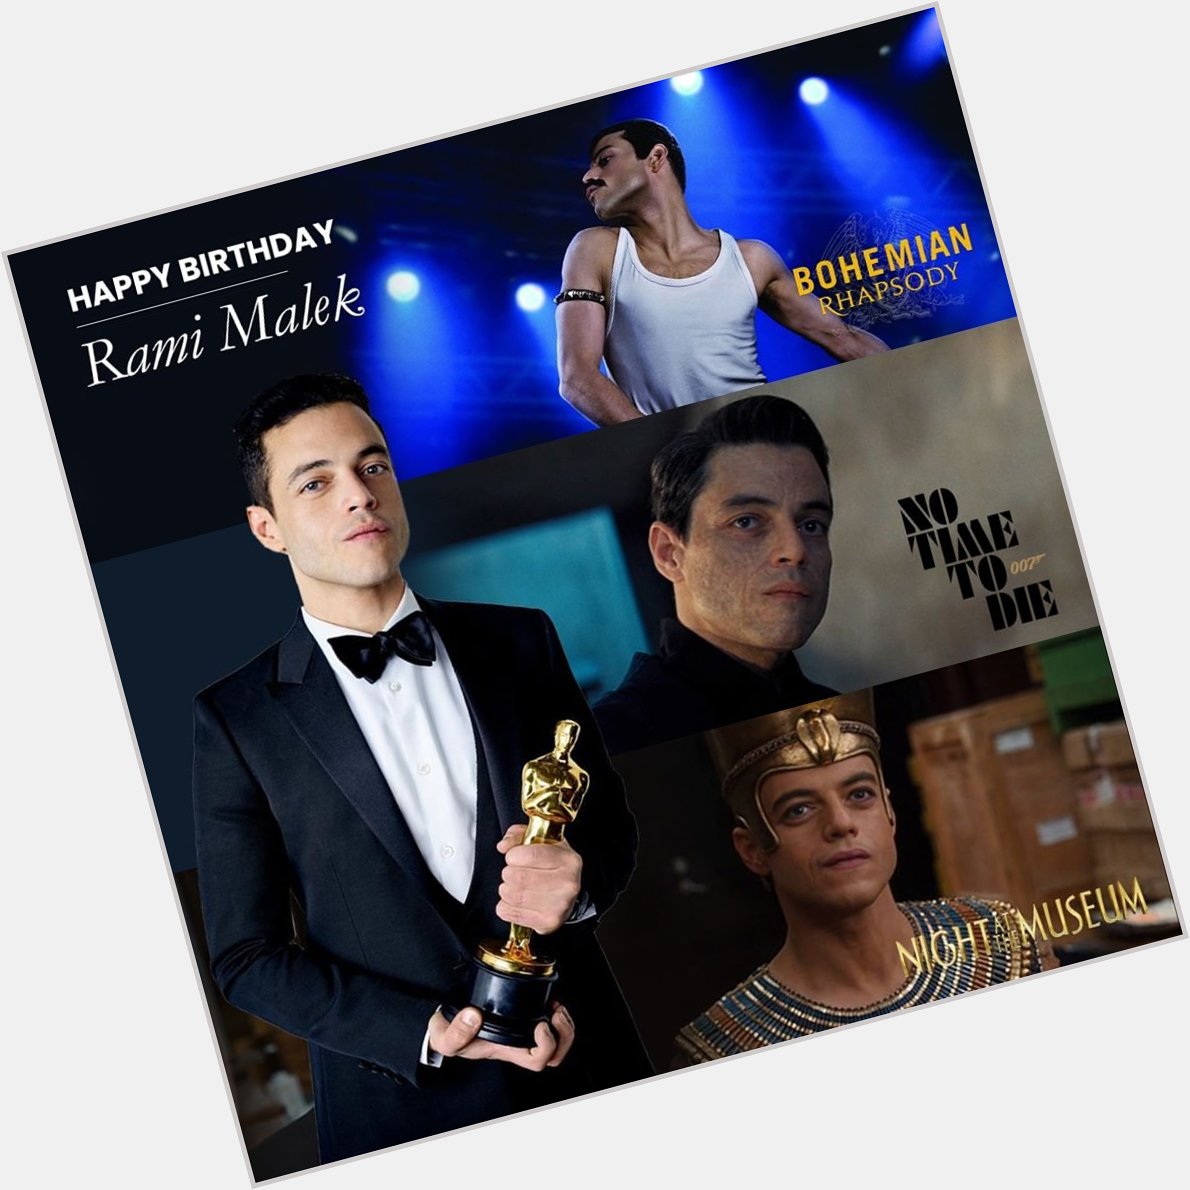 Happy Birthday to Rami Malek! Can\t wait to see his role as a Bond Villain in   